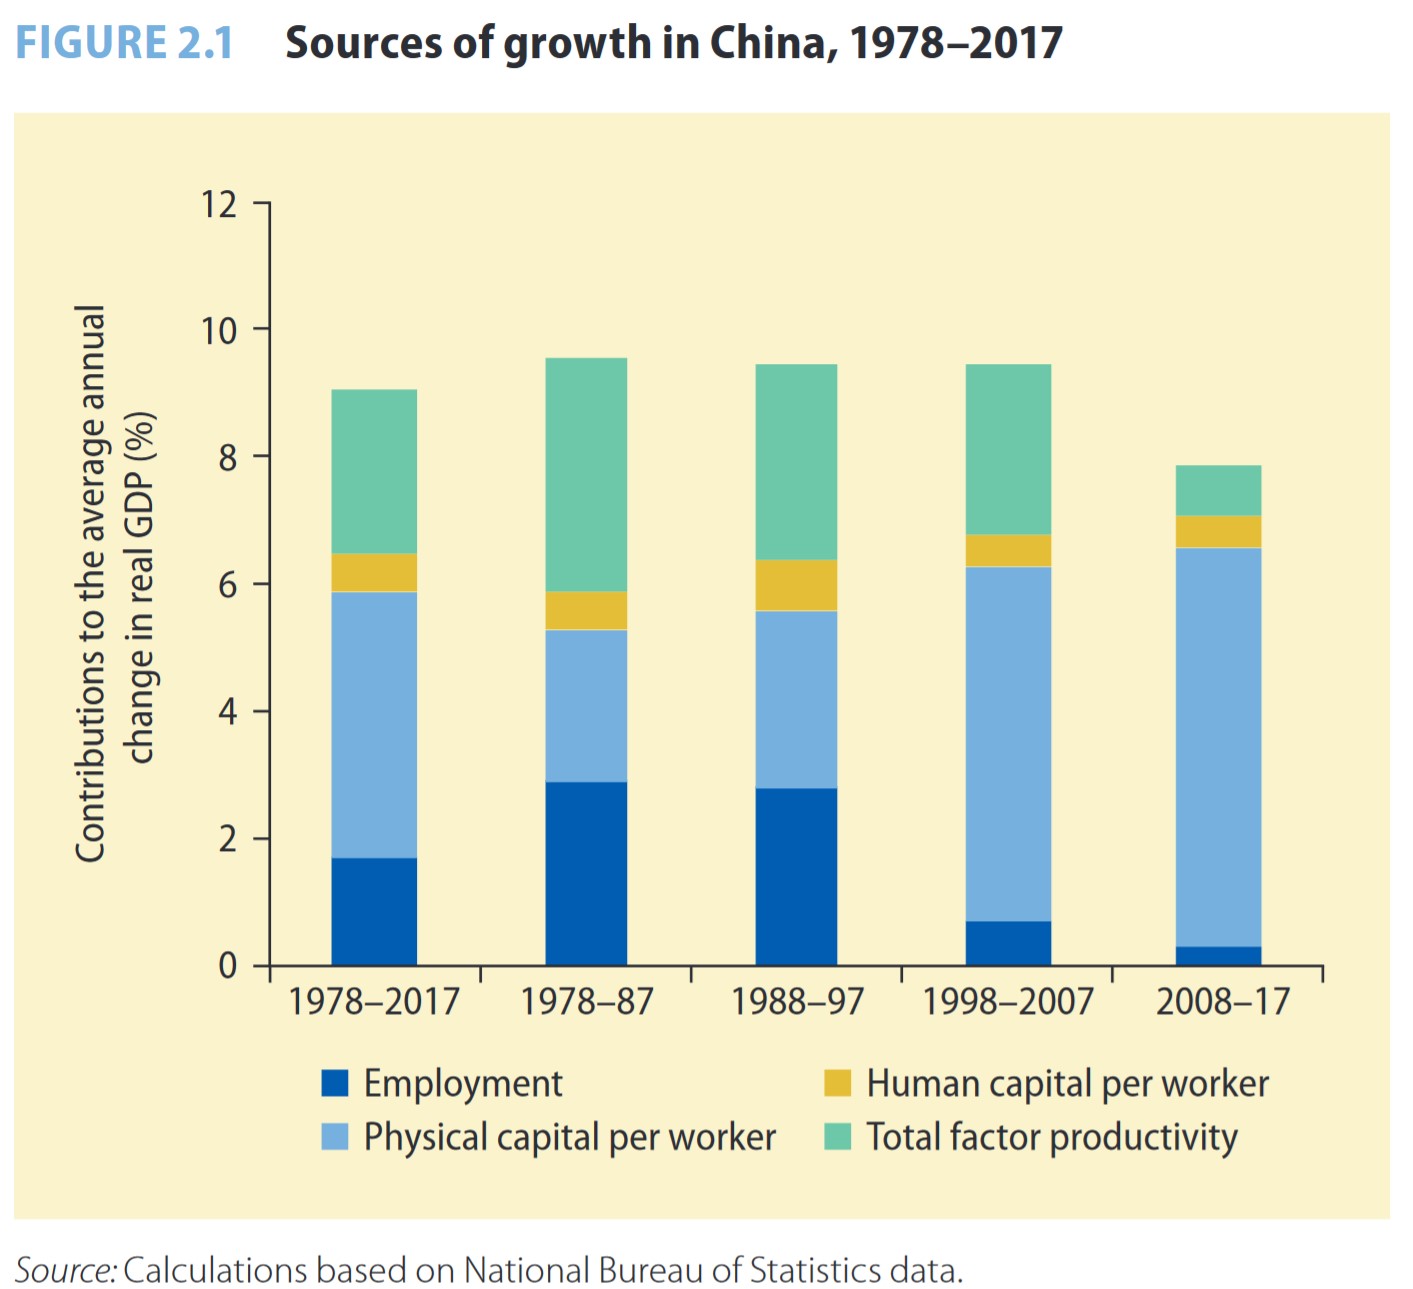 China Sources Of Growth 1978-2017